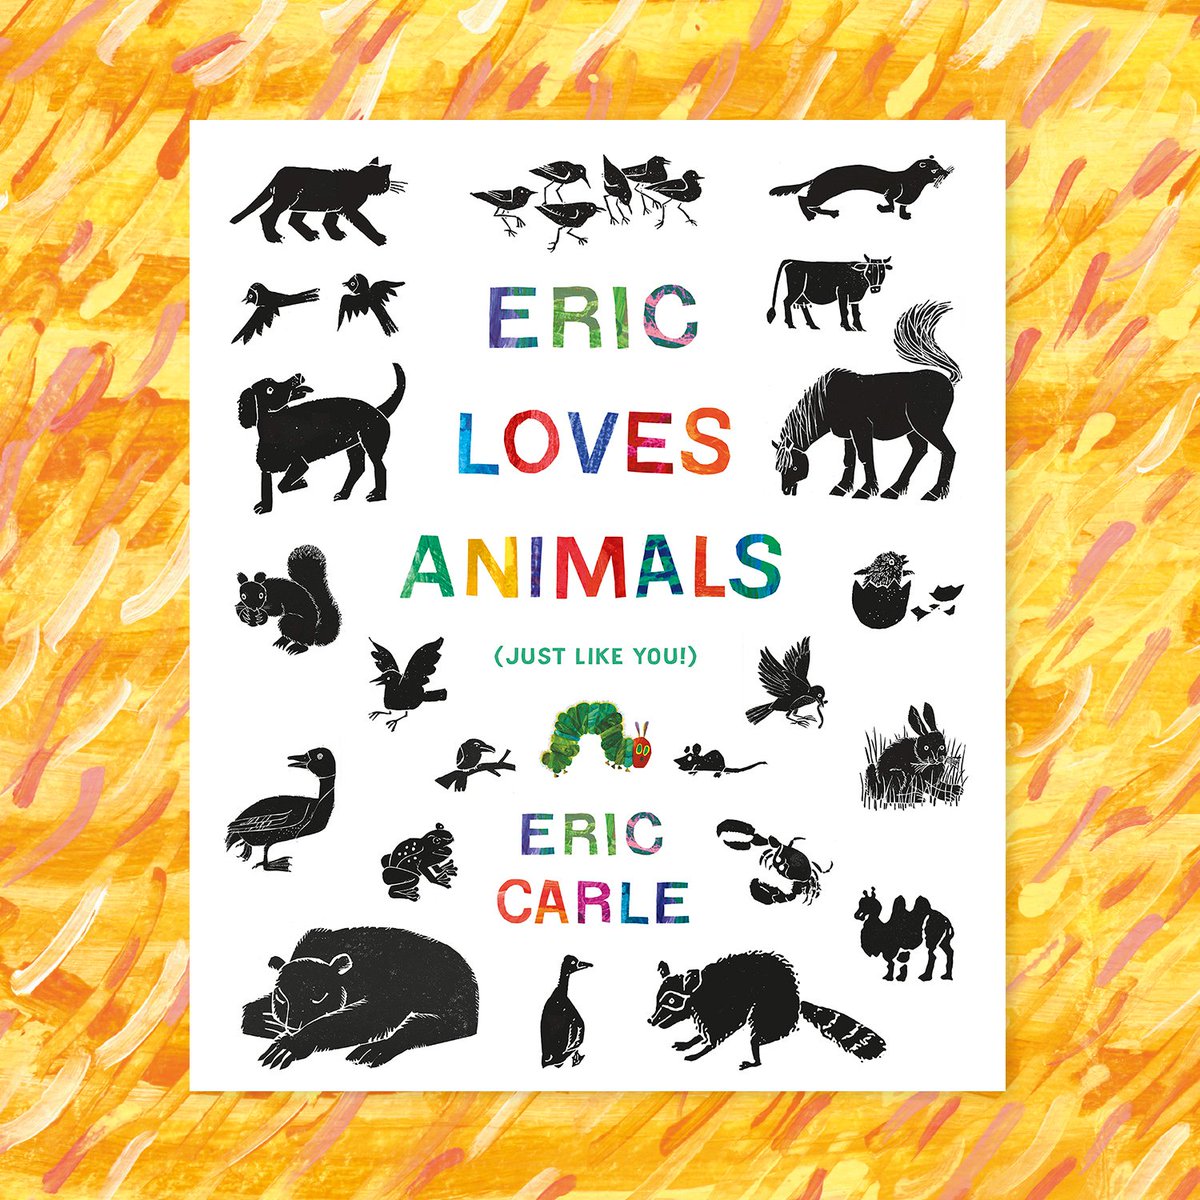 The Eric Carle team at Penguin Young Readers is overjoyed to share that a very special book, Eric Loves Animals (Just Like You!), is out on bookshelves this Valentine’s Day!